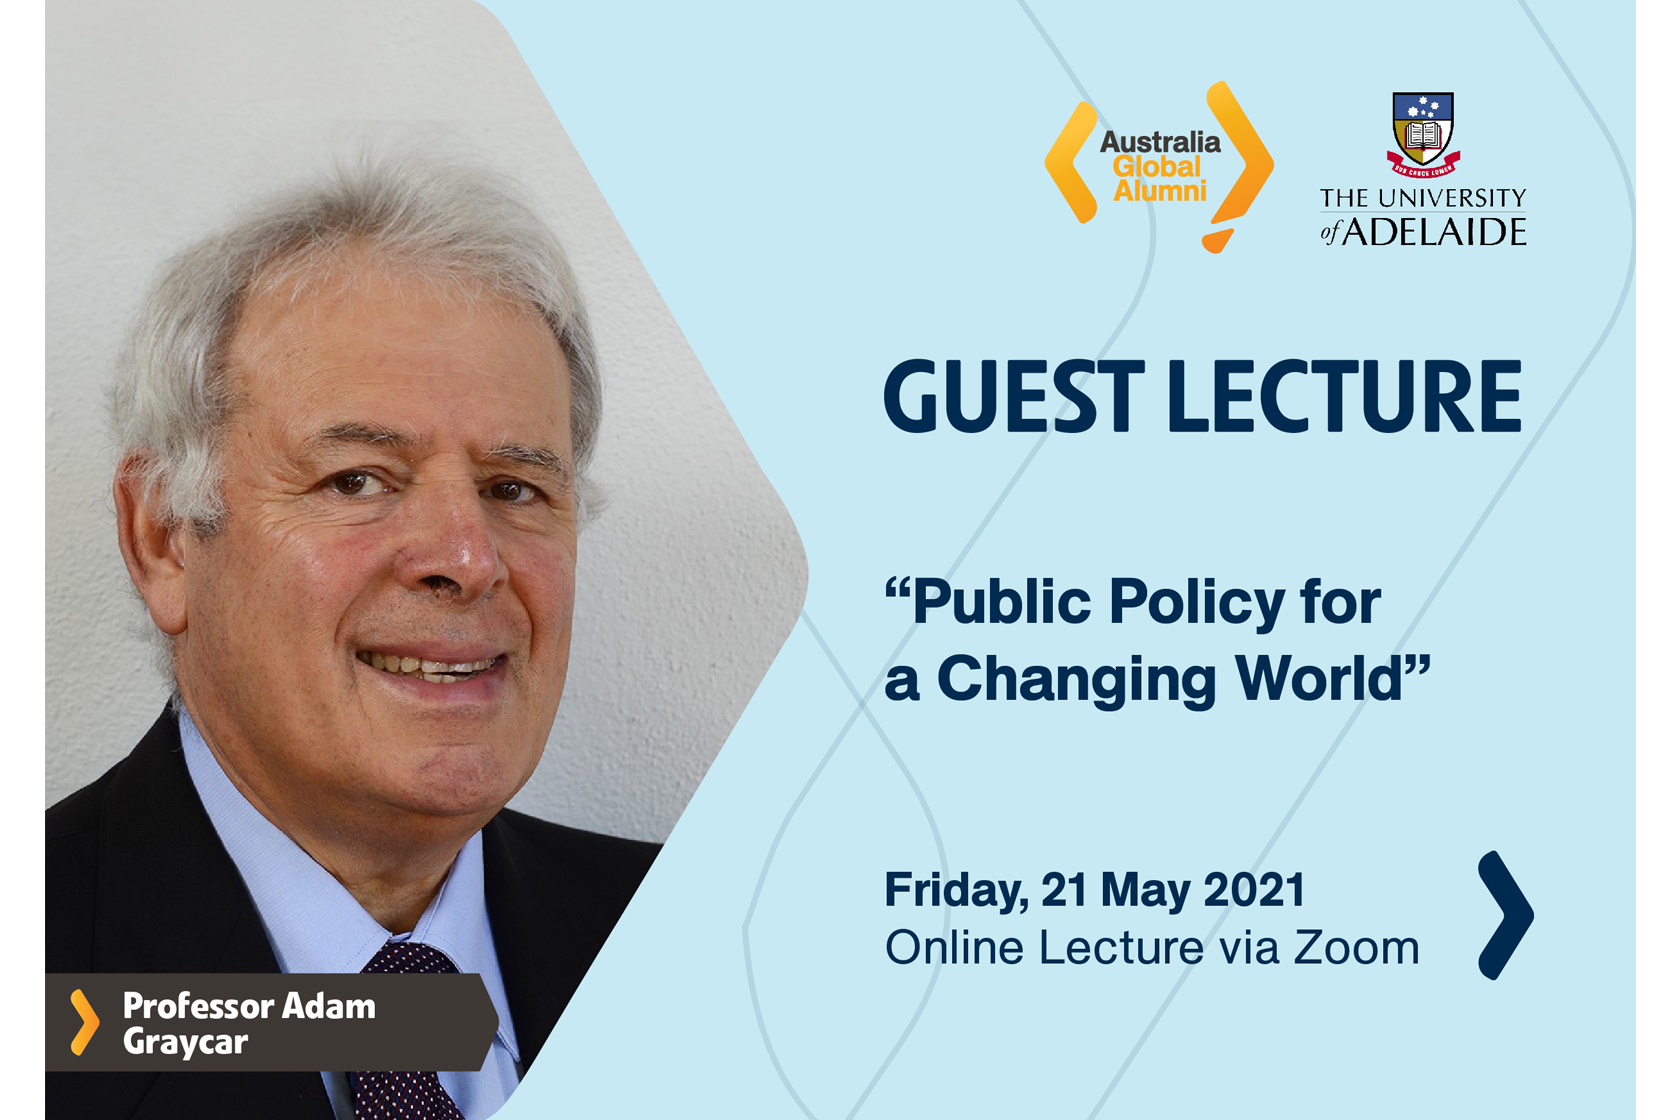 Join us in the Guest Lecture on Public Policy for a Changing World